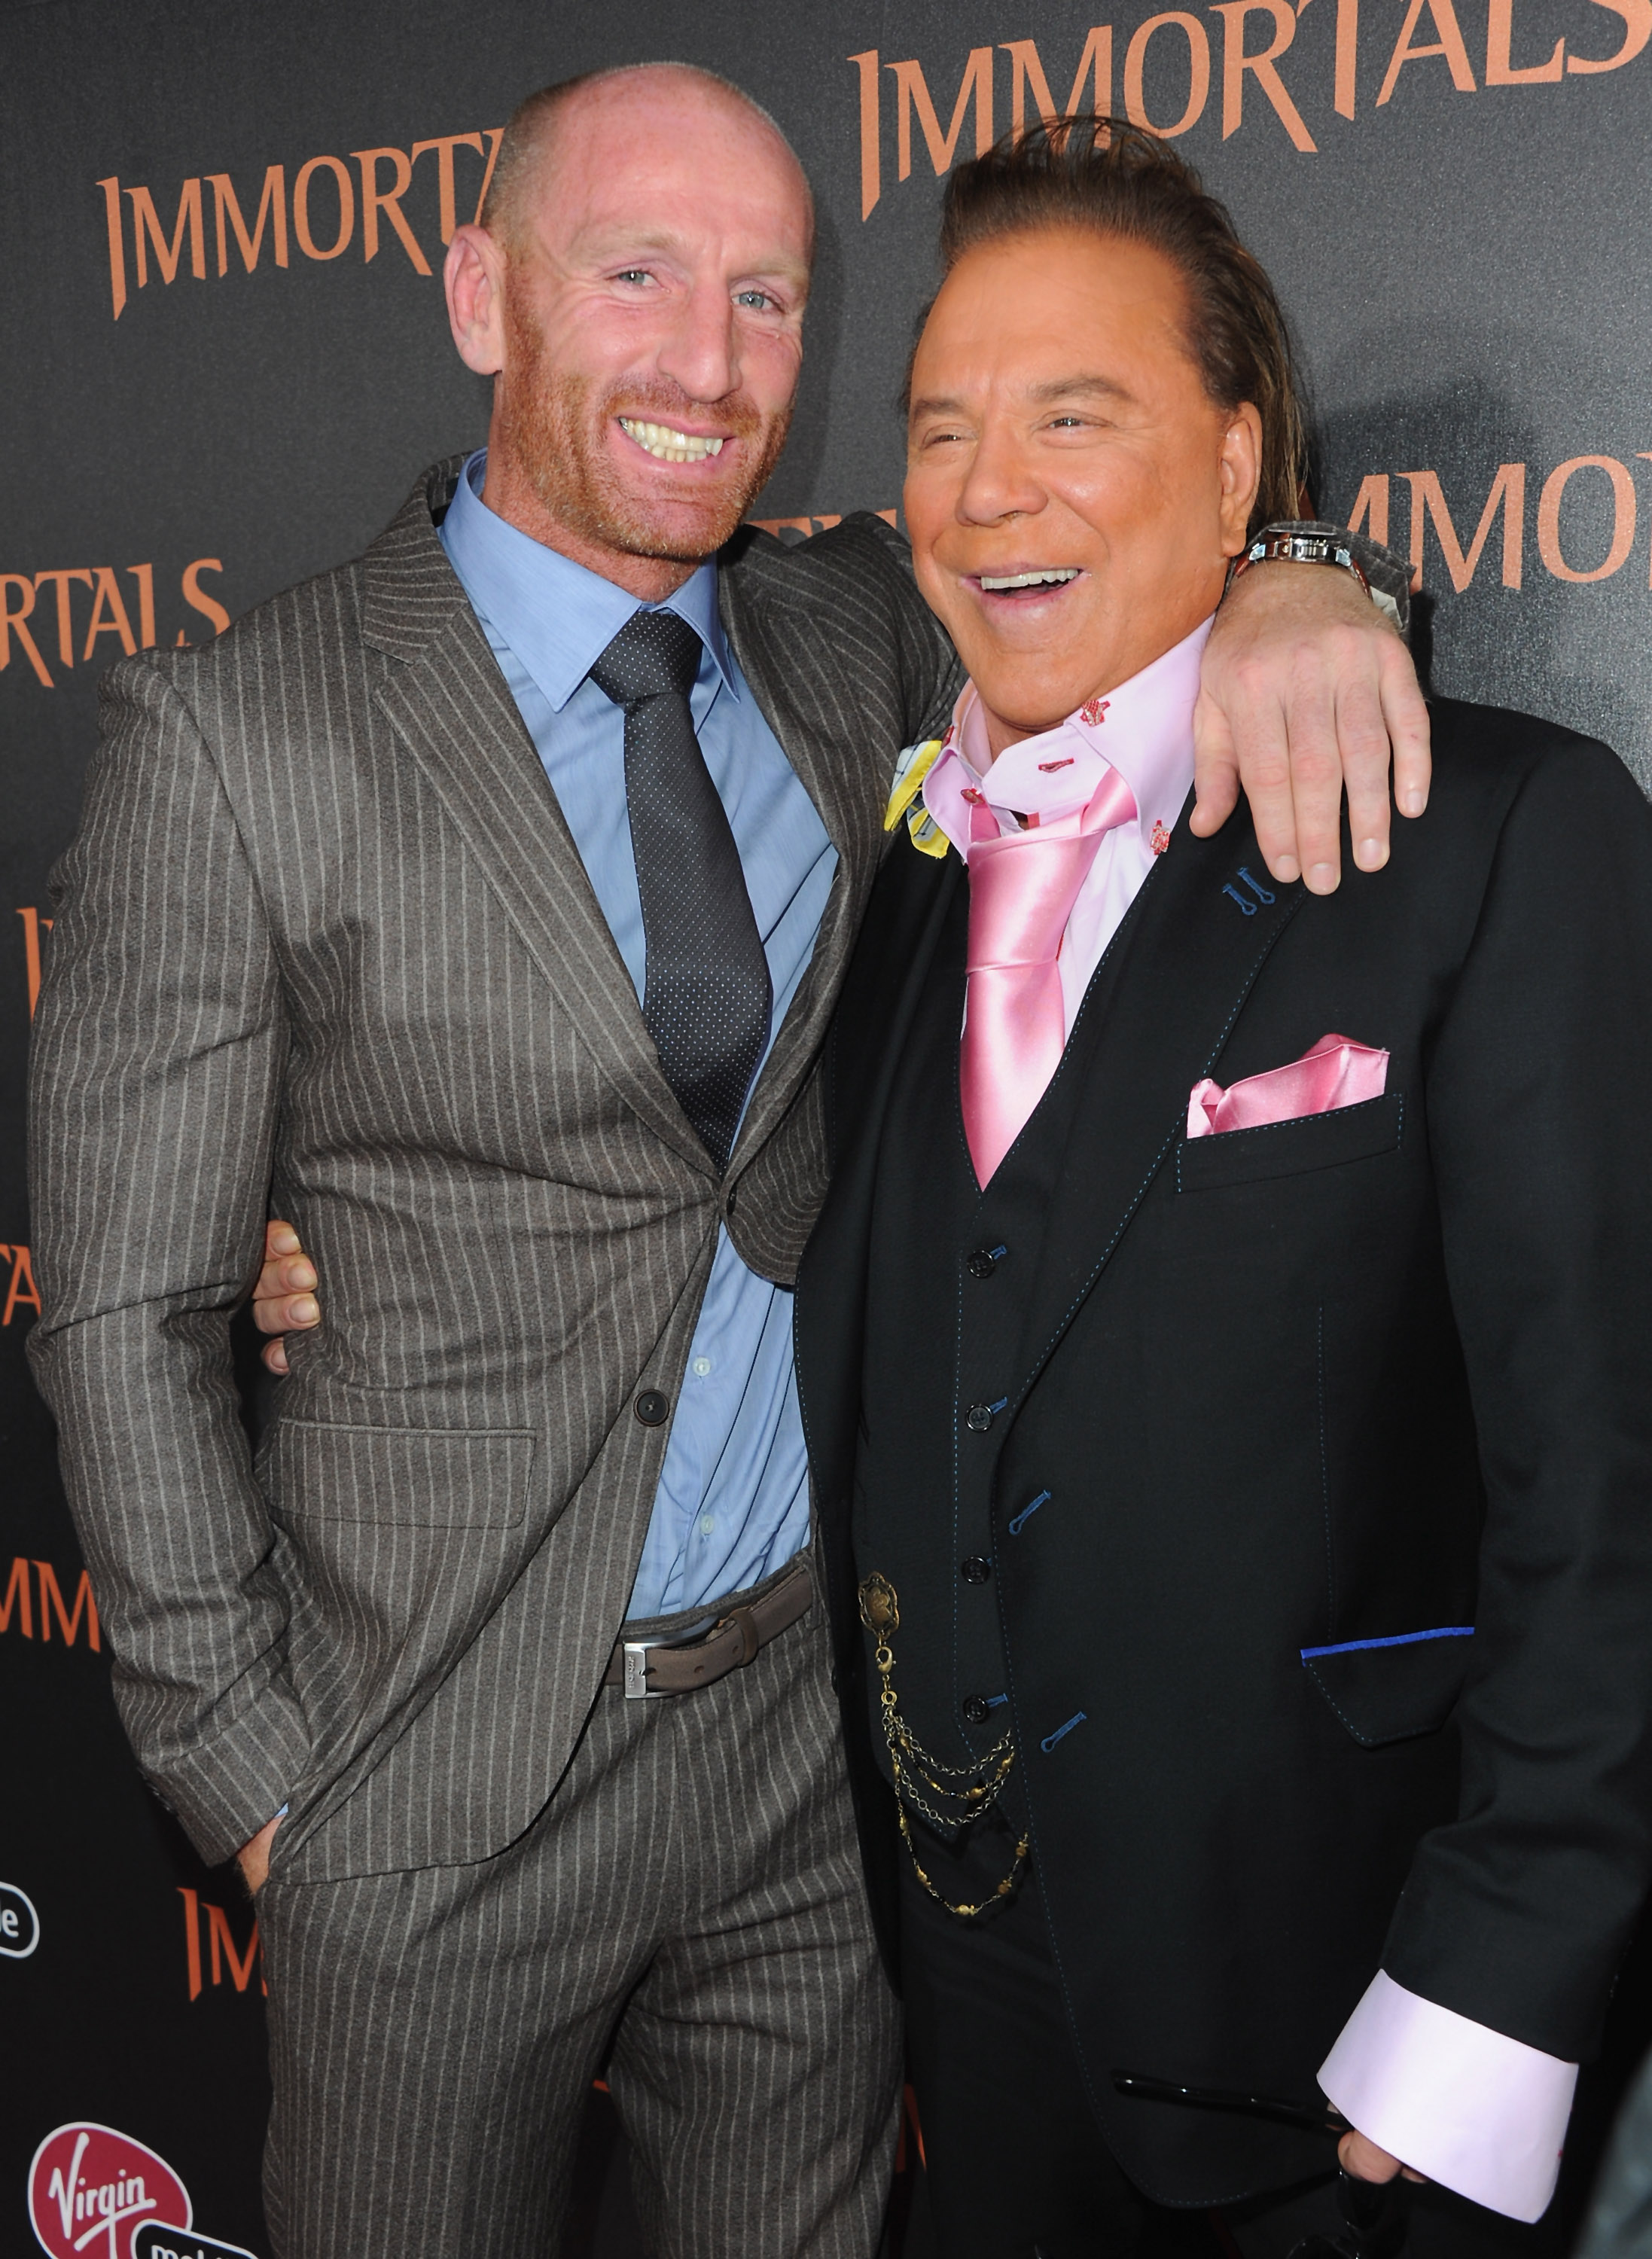 Gareth Thomas and Mickey Rourke arrive at Relativity Media's "Immortals" premiere at Nokia Theatre L.A. Live on November 7, 2011, in Los Angeles, California. | Source: Getty Images